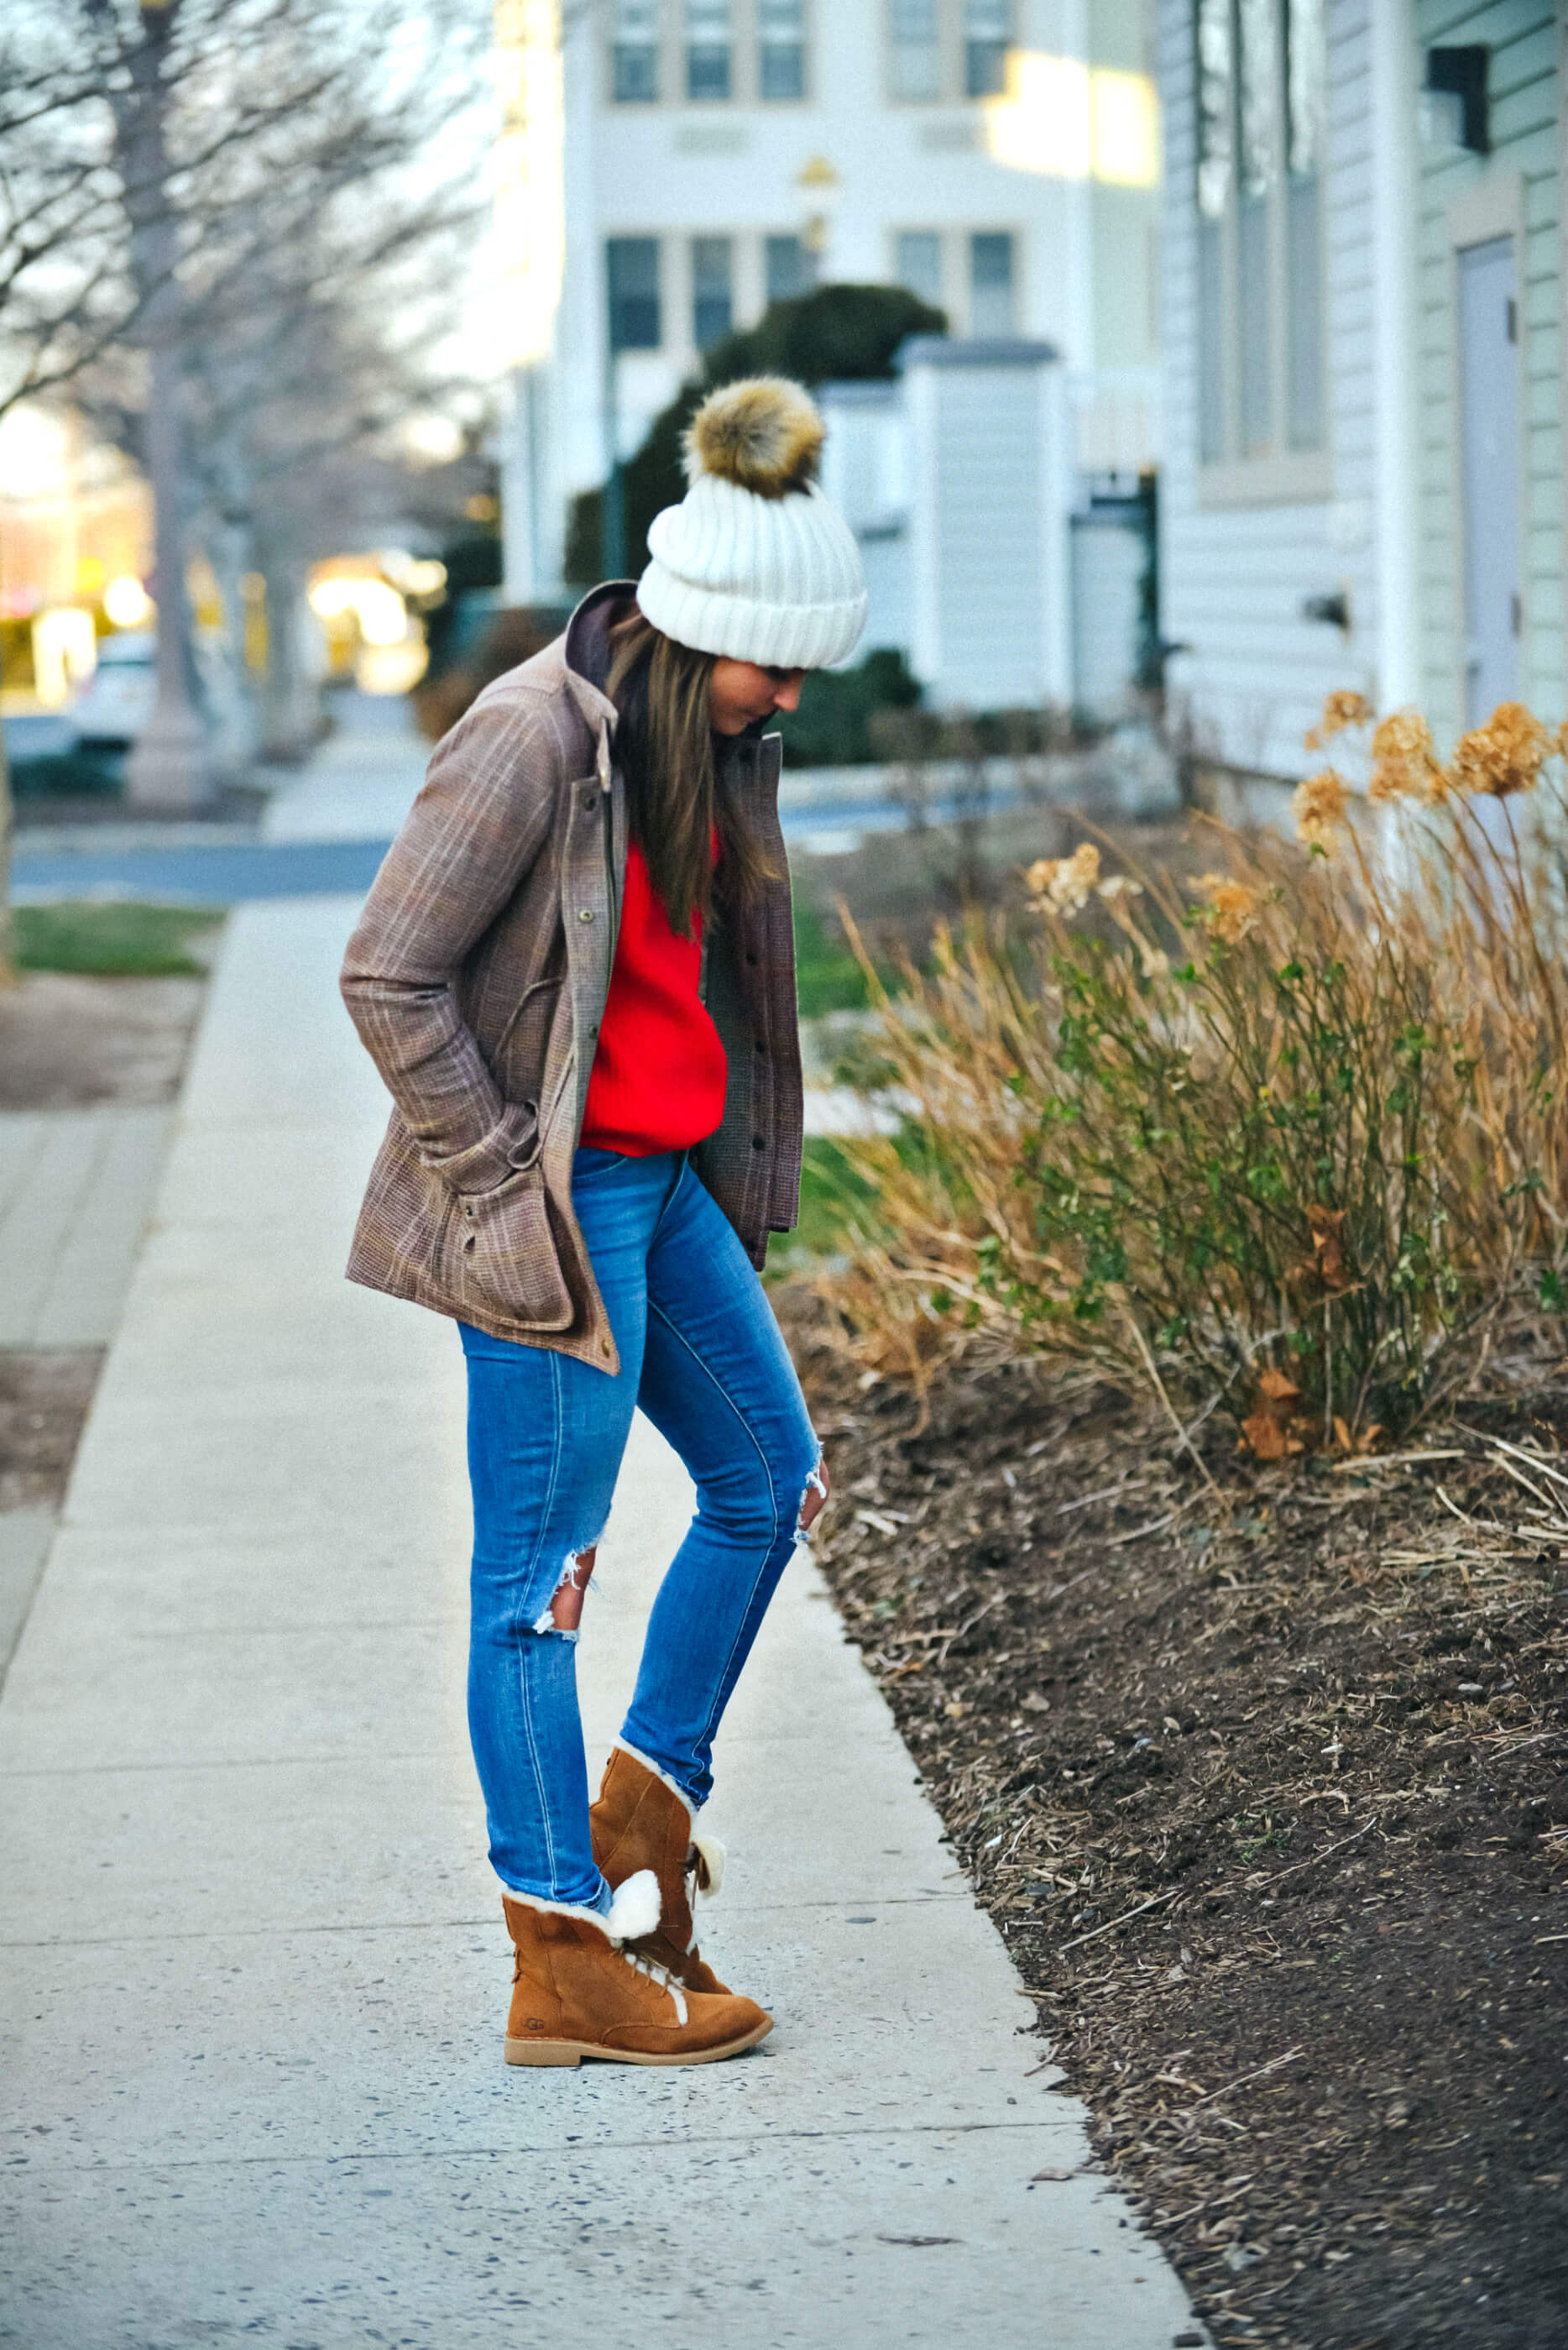 Joules Tweed Fieldcoat, Levi's 721 Denim, Pom Beanie, Winter Outfit, UGG boots, Tilden of To Be Bright